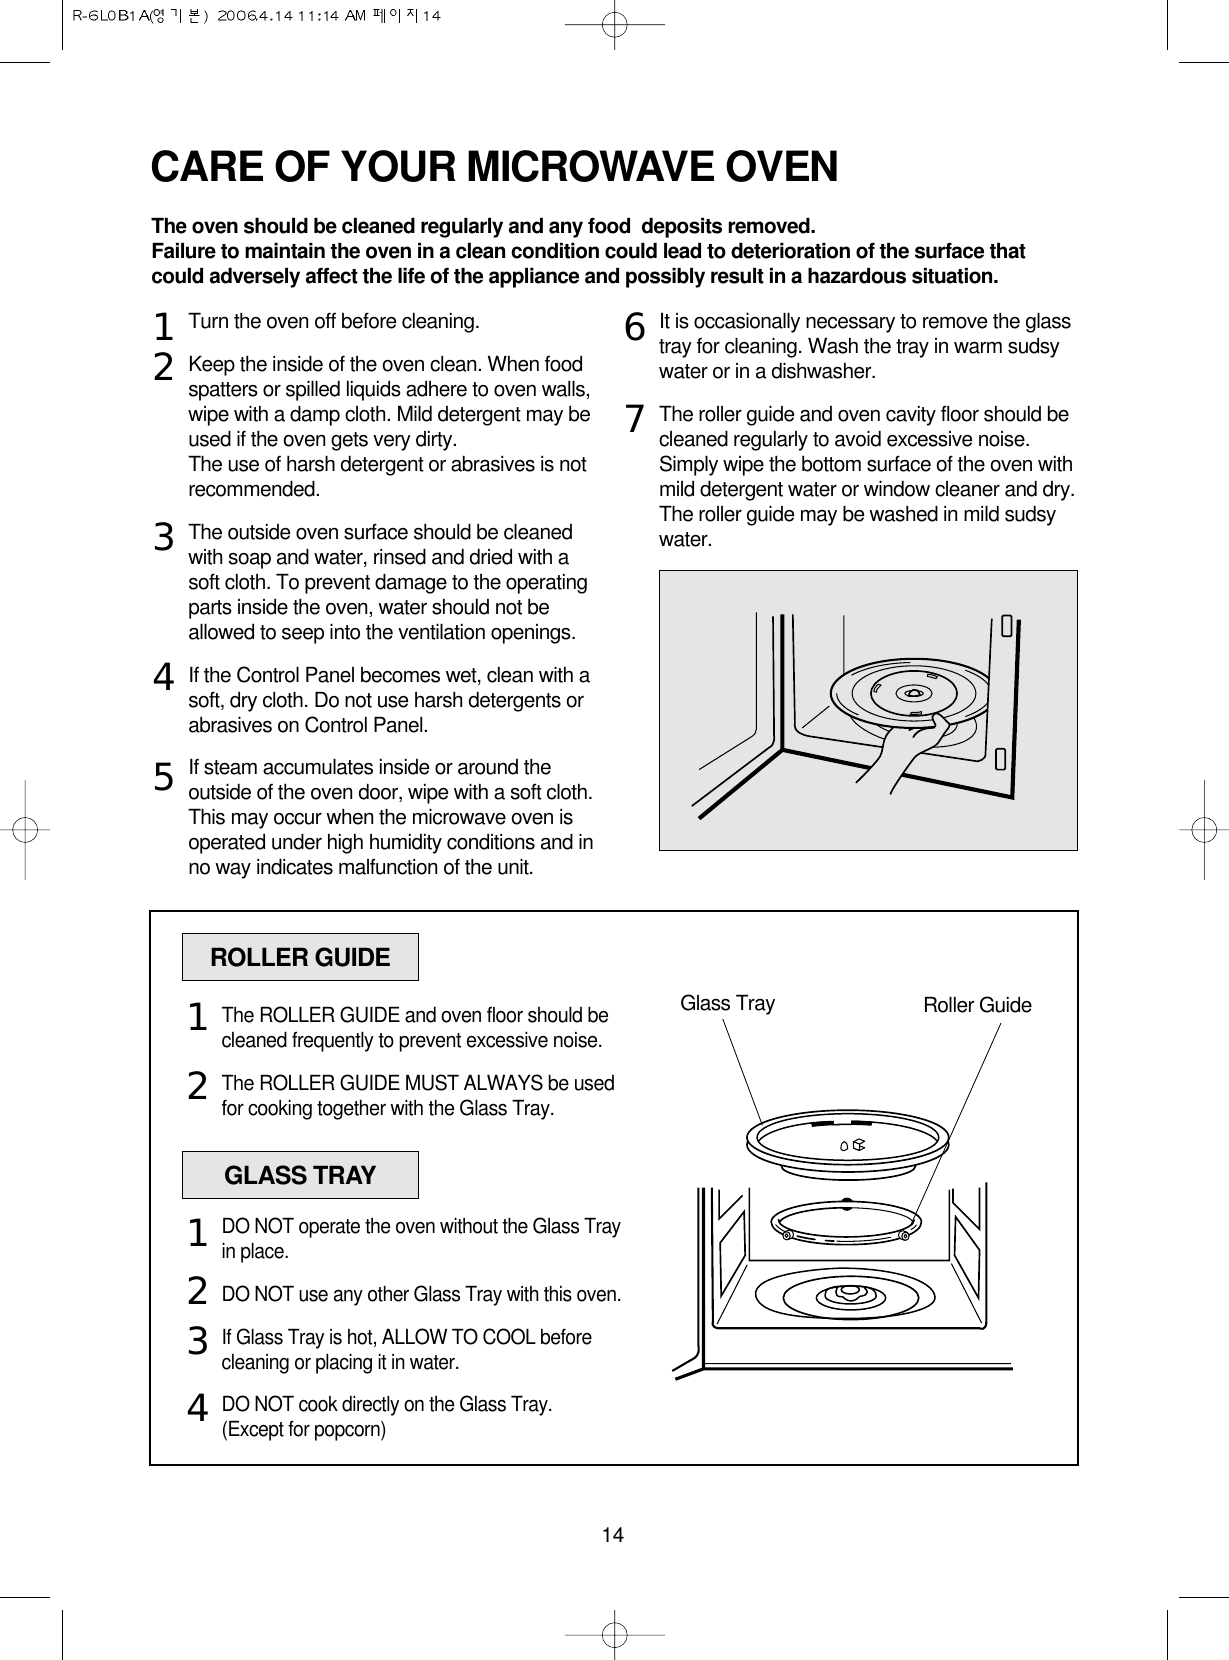 14CARE OF YOUR MICROWAVE OVENTurn the oven off before cleaning.Keep the inside of the oven clean. When foodspatters or spilled liquids adhere to oven walls,wipe with a damp cloth. Mild detergent may beused if the oven gets very dirty. The use of harsh detergent or abrasives is notrecommended.The outside oven surface should be cleanedwith soap and water, rinsed and dried with asoft cloth. To prevent damage to the operatingparts inside the oven, water should not beallowed to seep into the ventilation openings.If the Control Panel becomes wet, clean with asoft, dry cloth. Do not use harsh detergents orabrasives on Control Panel.If steam accumulates inside or around theoutside of the oven door, wipe with a soft cloth.This may occur when the microwave oven isoperated under high humidity conditions and inno way indicates malfunction of the unit.It is occasionally necessary to remove the glasstray for cleaning. Wash the tray in warm sudsywater or in a dishwasher.The roller guide and oven cavity floor should becleaned regularly to avoid excessive noise. Simply wipe the bottom surface of the oven withmild detergent water or window cleaner and dry.The roller guide may be washed in mild sudsywater.1234567ROLLER GUIDEGlass Tray Roller GuideThe ROLLER GUIDE and oven floor should becleaned frequently to prevent excessive noise.The ROLLER GUIDE MUST ALWAYS be usedfor cooking together with the Glass Tray.12GLASS TRAYDO NOT operate the oven without the Glass Trayin place.DO NOT use any other Glass Tray with this oven.If Glass Tray is hot, ALLOW TO COOL beforecleaning or placing it in water.DO NOT cook directly on the Glass Tray.(Except for popcorn)1234The oven should be cleaned regularly and any food  deposits removed.Failure to maintain the oven in a clean condition could lead to deterioration of the surface thatcould adversely affect the life of the appliance and possibly result in a hazardous situation.